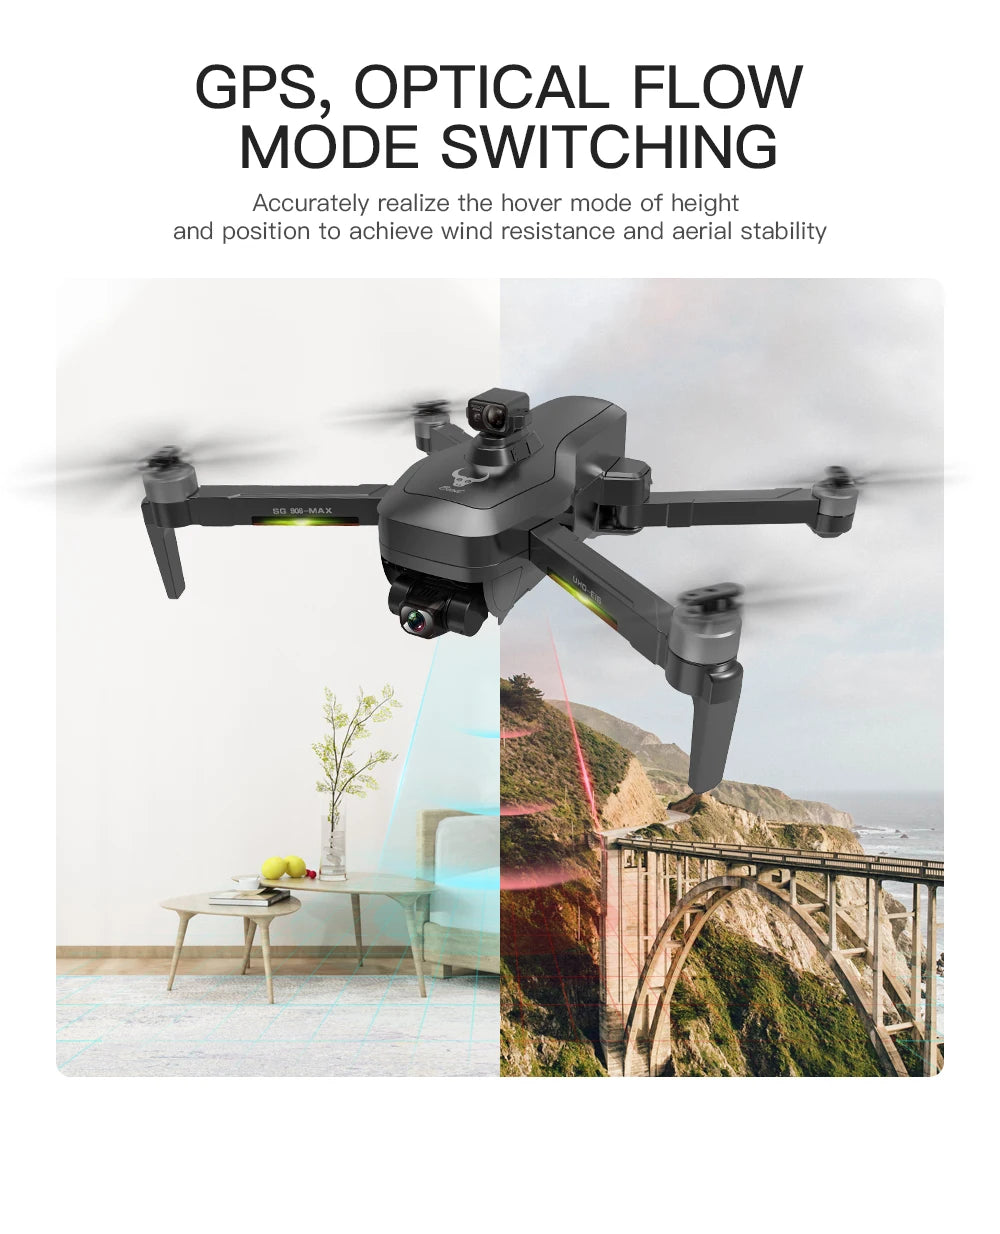 HGIYI SG906 MAX2  Drone, GPS, OPTICAL FLOW MODE SWITCHING Accurately realize the